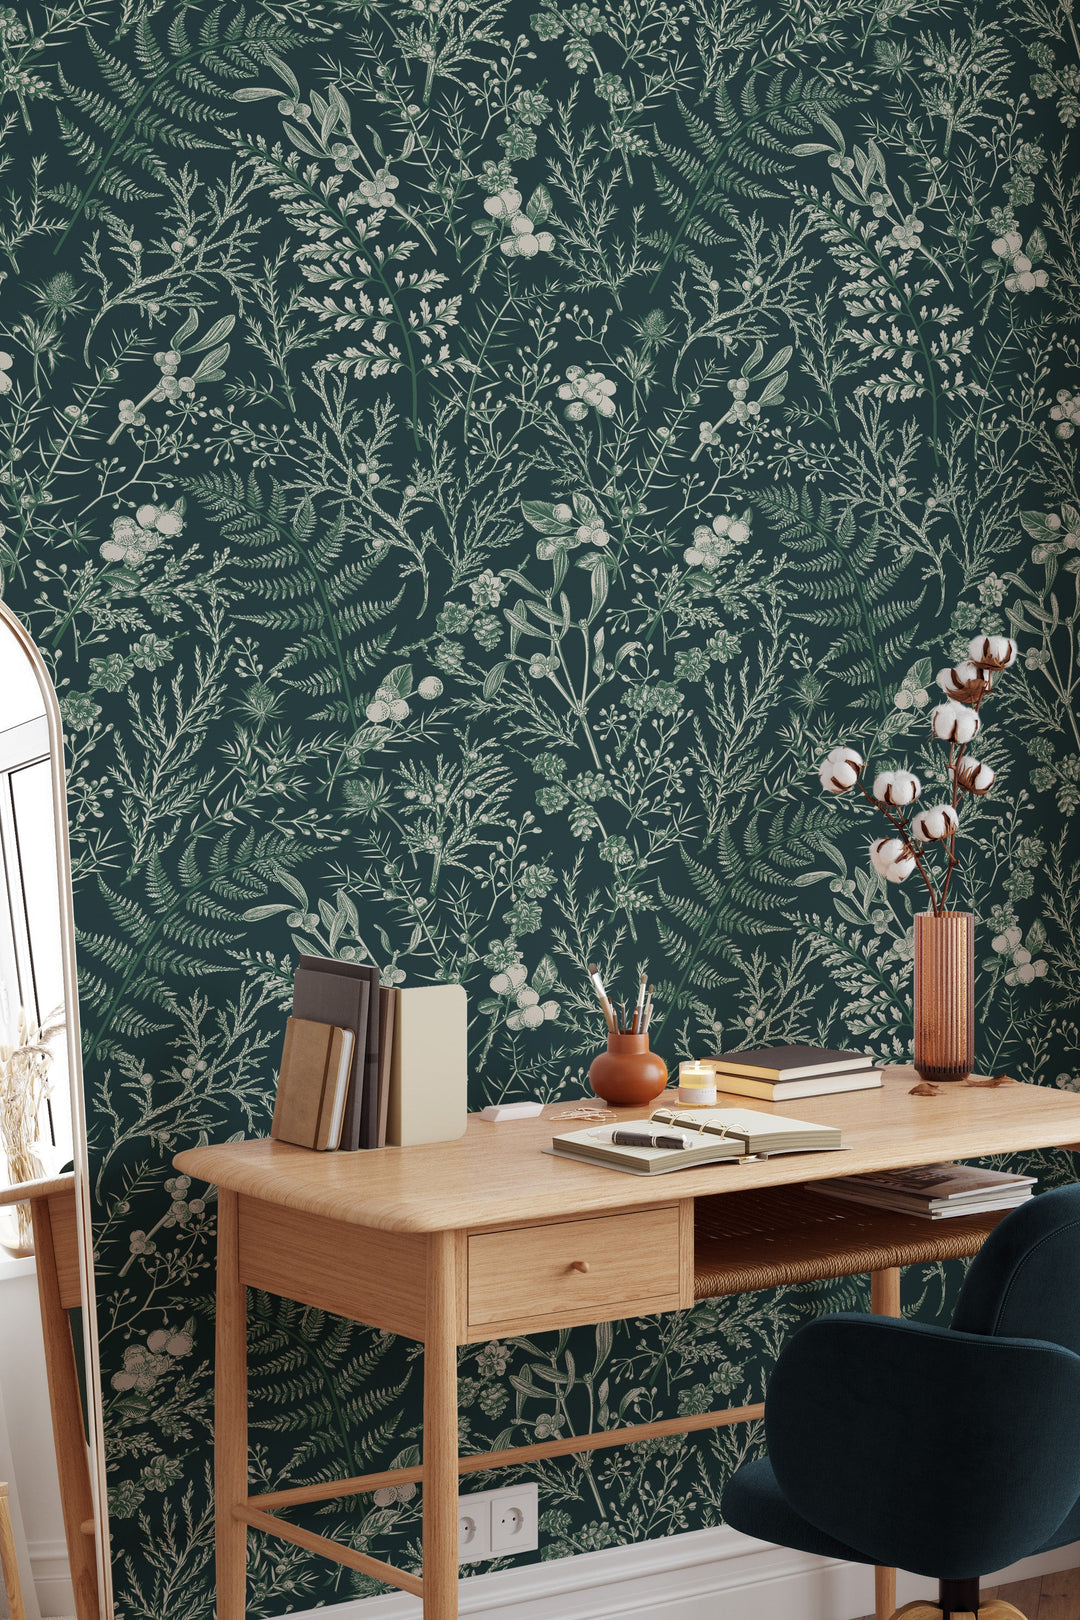 Removable and Renter Friendly, Fern Botanical Wallpaper, Peel and Stick and Traditional Wallpaper, Leaves Wall Art, Self Adhesive 3454